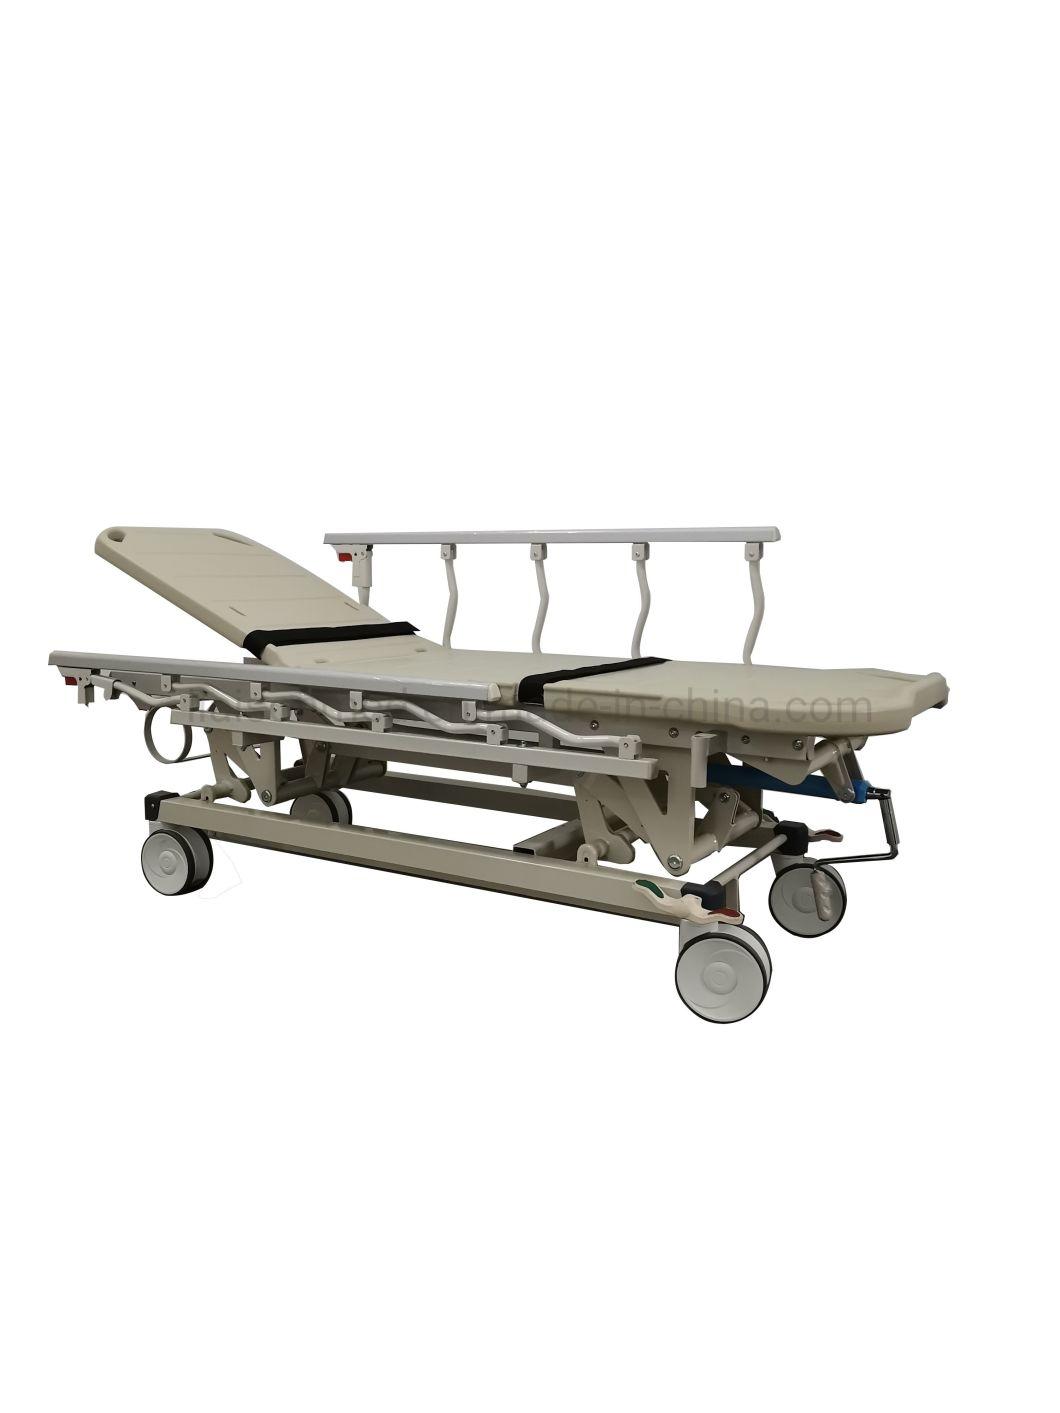 Mn-SD006 Top Quality Hospital CE&ISO Approved Medical Stretcher